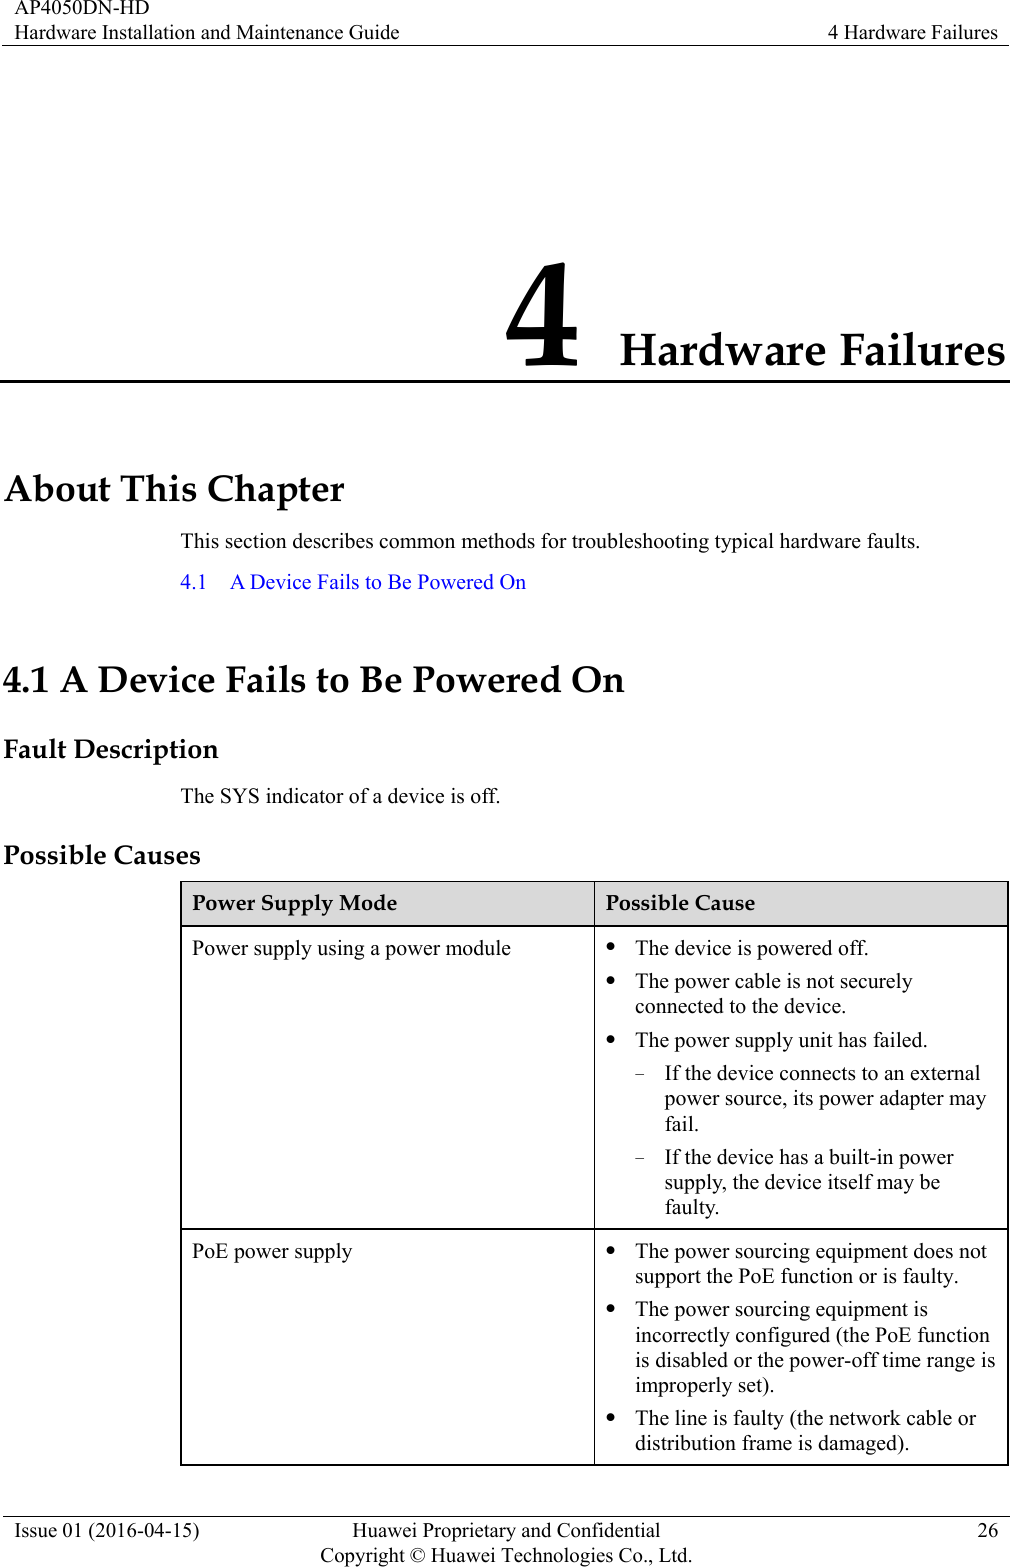 AP4050DN-HD Hardware Installation and Maintenance Guide  4 Hardware Failures Issue 01 (2016-04-15)  Huawei Proprietary and Confidential         Copyright © Huawei Technologies Co., Ltd.26 4 Hardware Failures About This Chapter This section describes common methods for troubleshooting typical hardware faults. 4.1    A Device Fails to Be Powered On 4.1 A Device Fails to Be Powered On Fault Description The SYS indicator of a device is off. Possible Causes Power Supply Mode  Possible Cause Power supply using a power module   The device is powered off.  The power cable is not securely connected to the device.  The power supply unit has failed. − If the device connects to an external power source, its power adapter may fail. − If the device has a built-in power supply, the device itself may be faulty. PoE power supply   The power sourcing equipment does not support the PoE function or is faulty.  The power sourcing equipment is incorrectly configured (the PoE function is disabled or the power-off time range is improperly set).  The line is faulty (the network cable or distribution frame is damaged). 